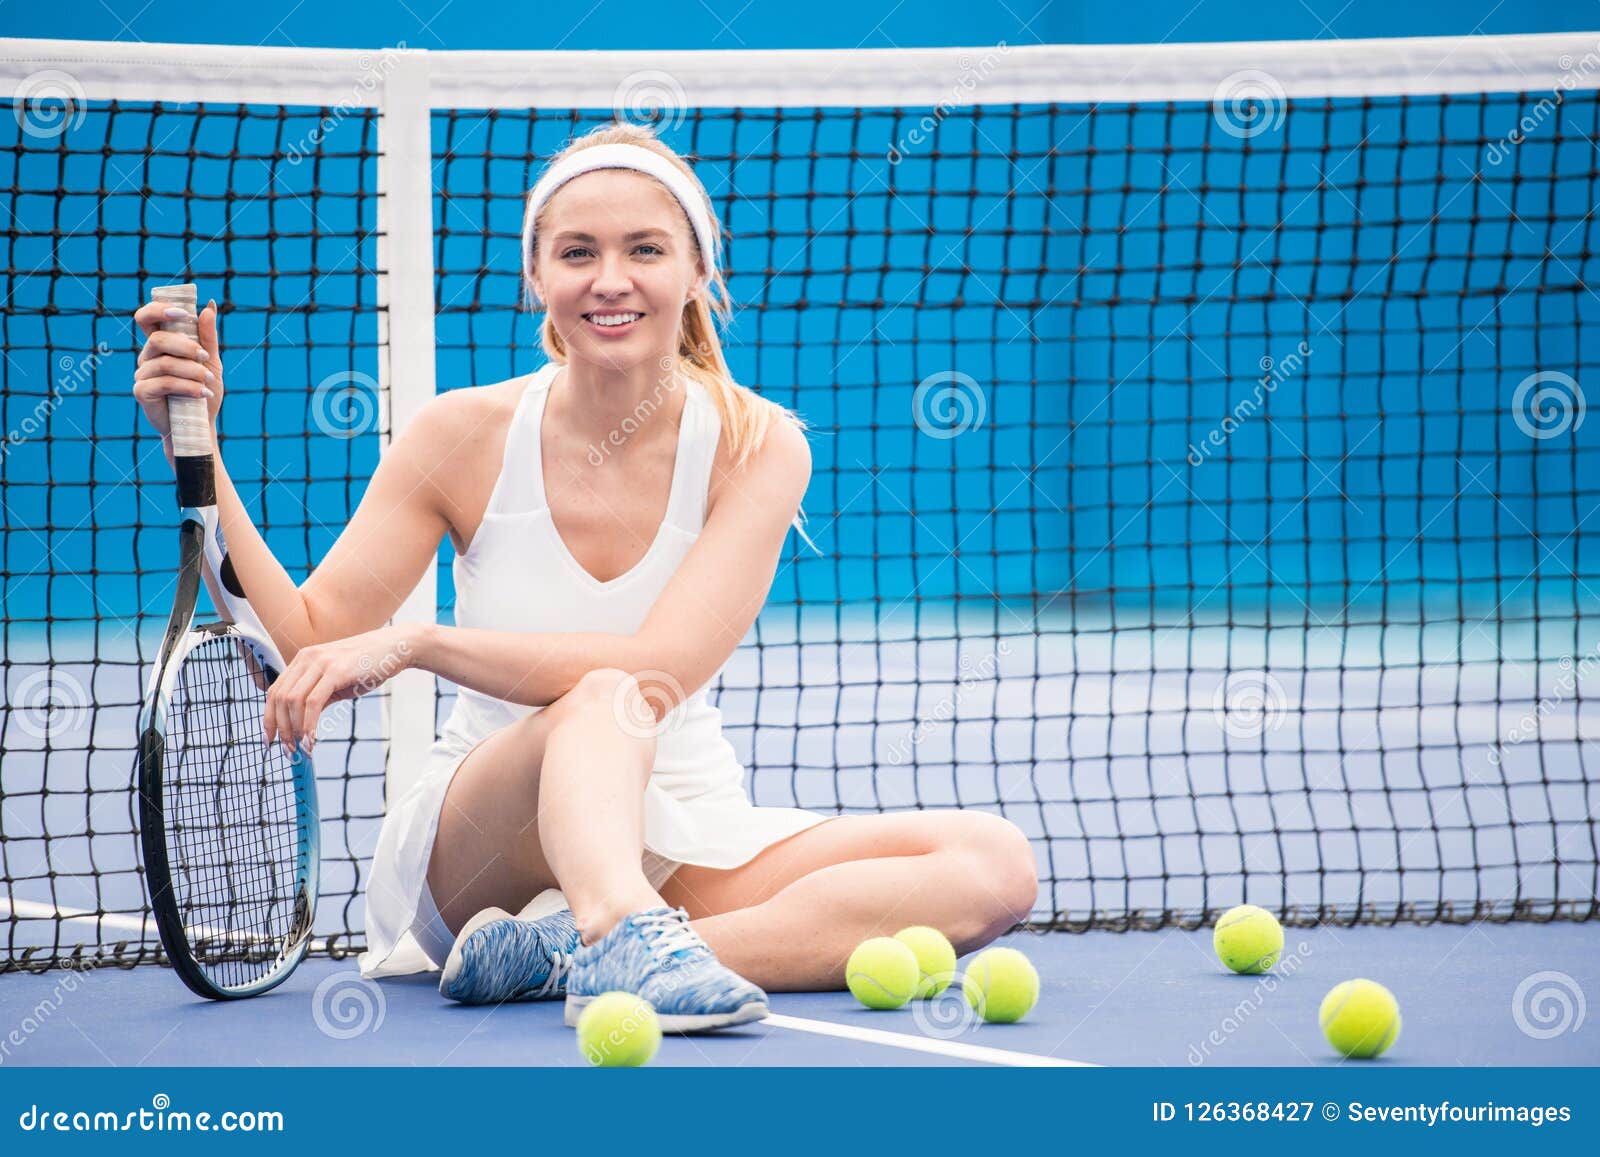 Cheerful Tennis Player In Court Stock Image Image Of Training Posing